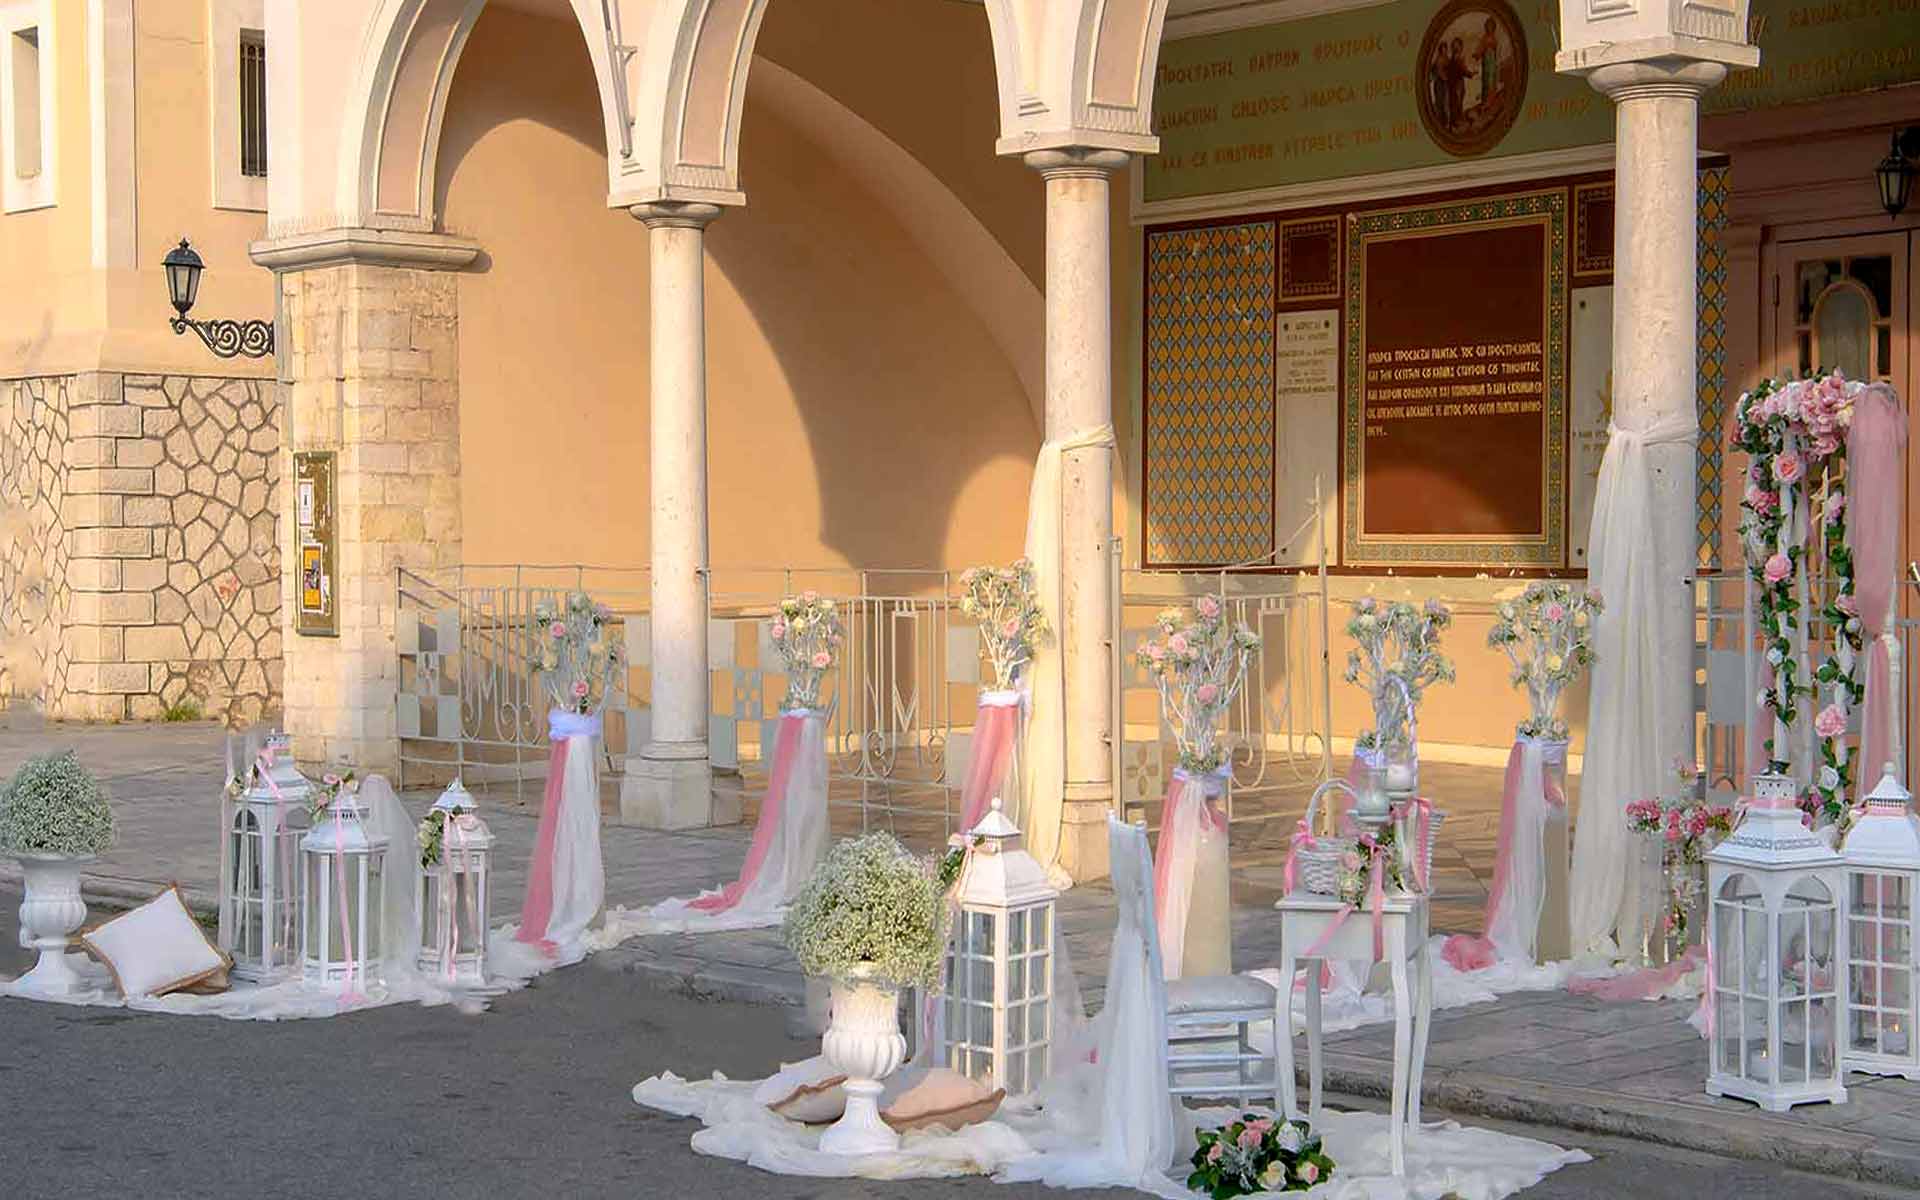 Unique and simple wedding church decoration in romantic style, rogdaki events trademark event planning services